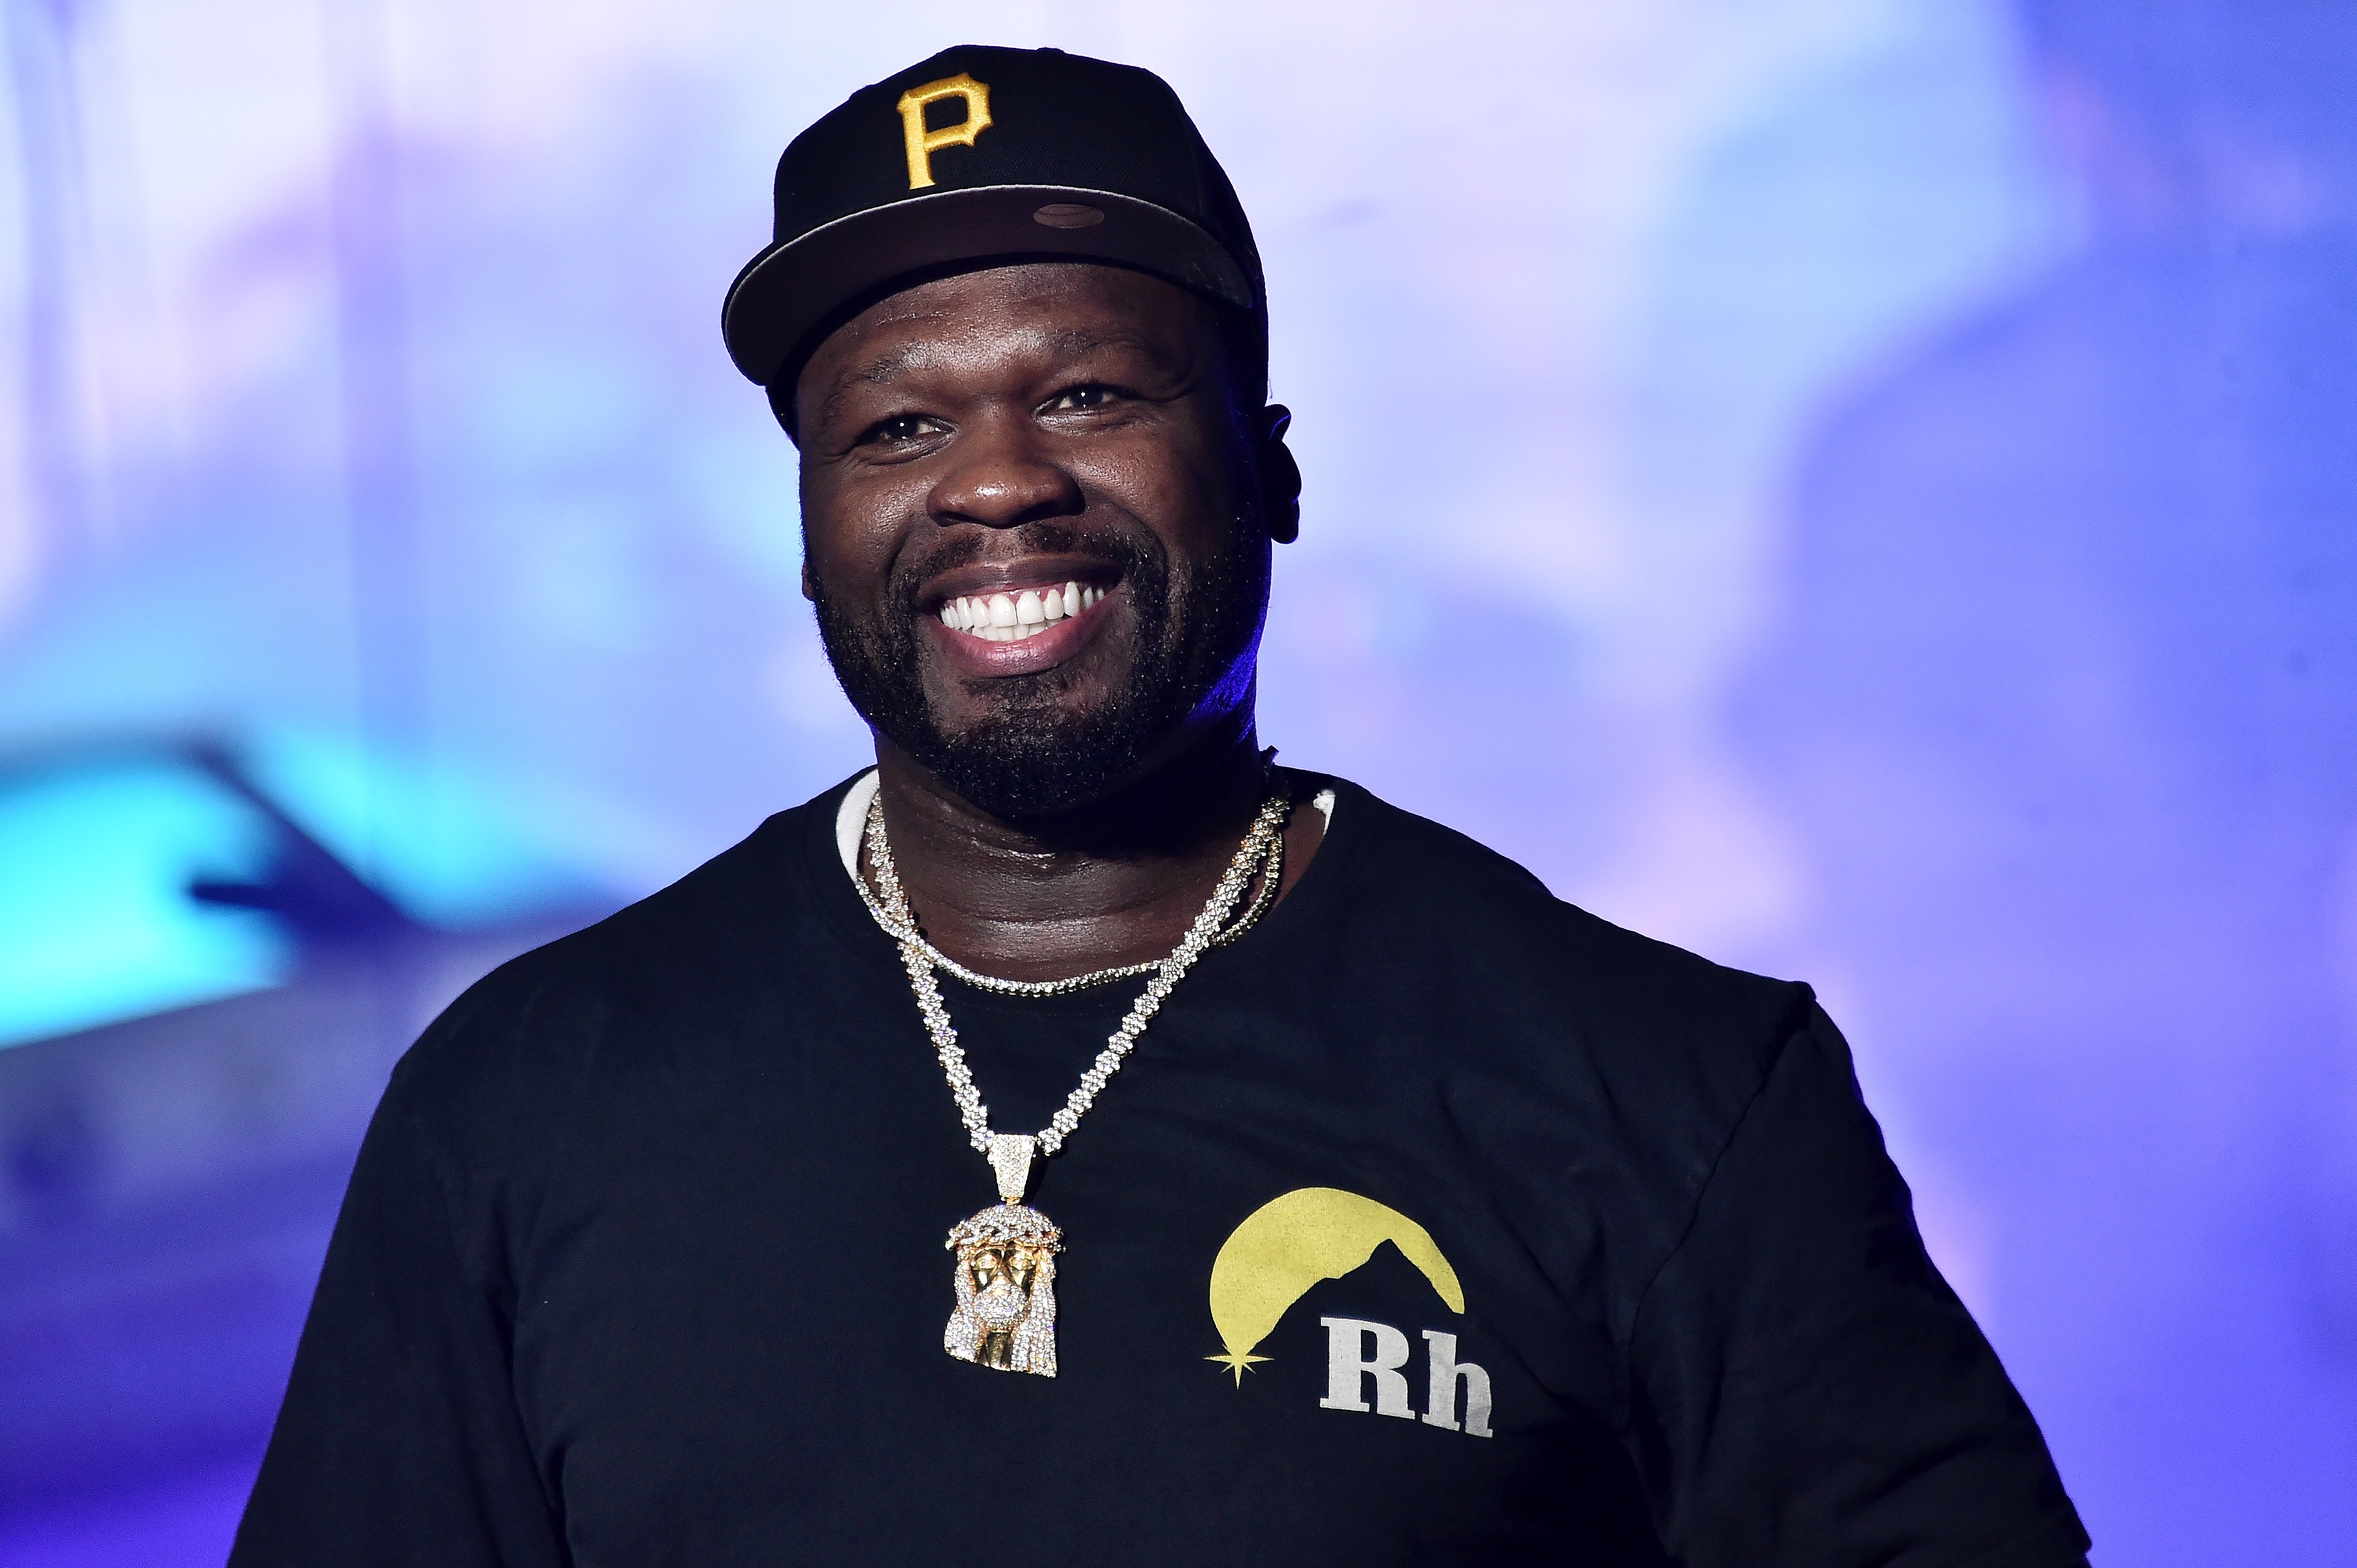 50 Cent performs live during Rolling Loud music festival on October 13, 2019, in New York City. | Source: Getty Images.